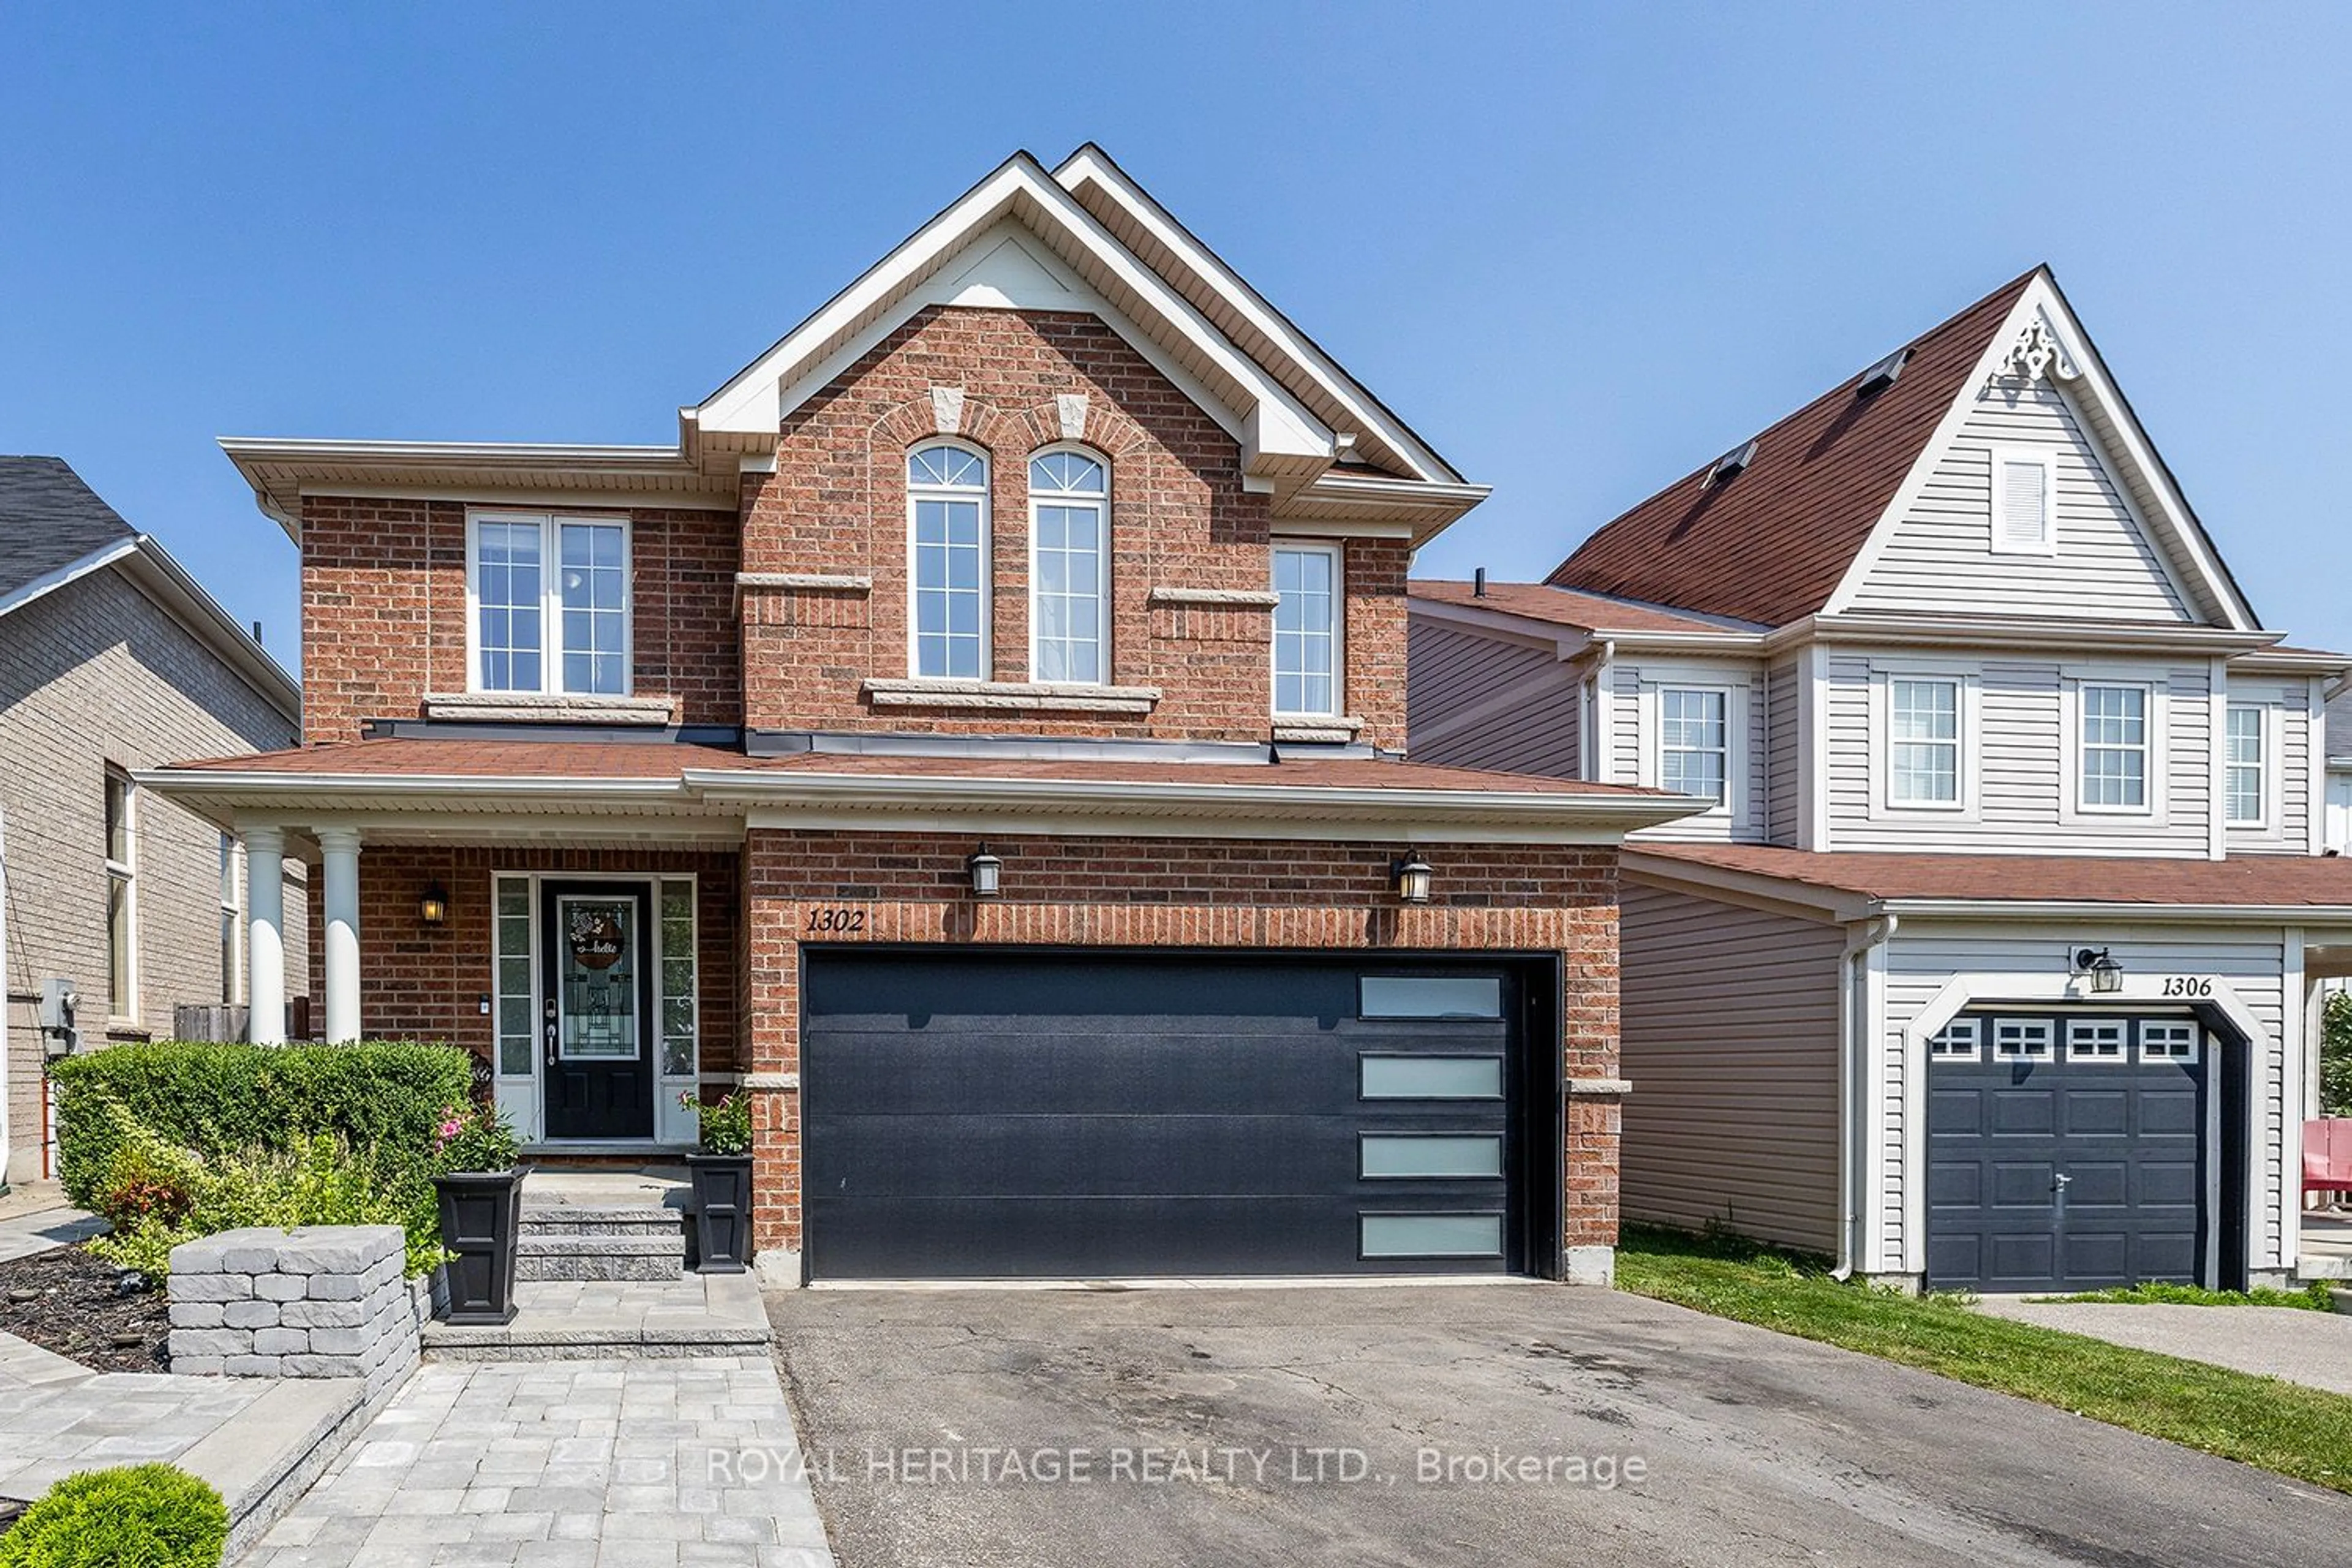 Home with brick exterior material for 1302 Whitelaw Ave, Oshawa Ontario L1K 0M6